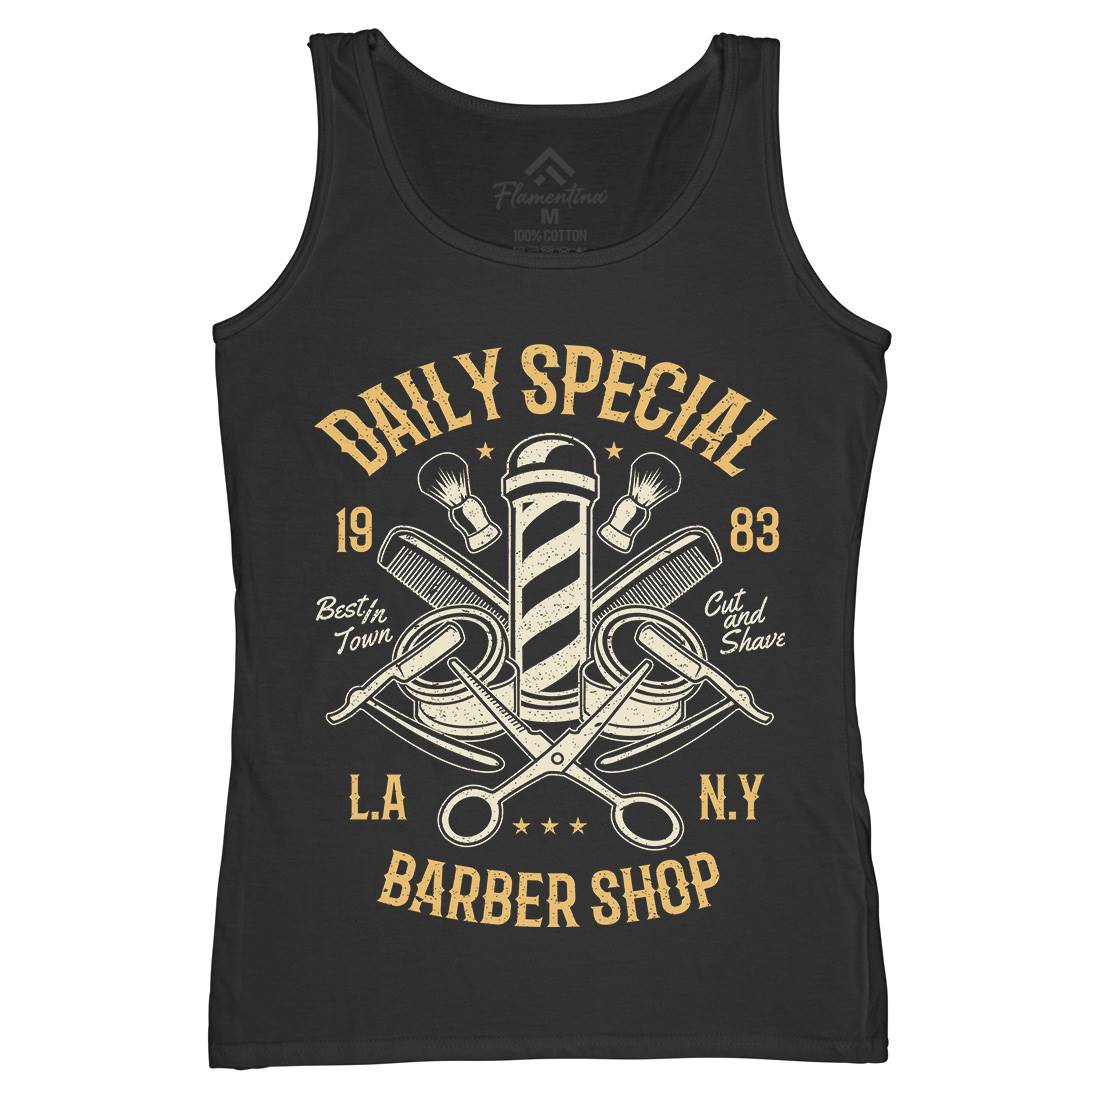 Daily Special Shop Womens Organic Tank Top Vest Barber A041